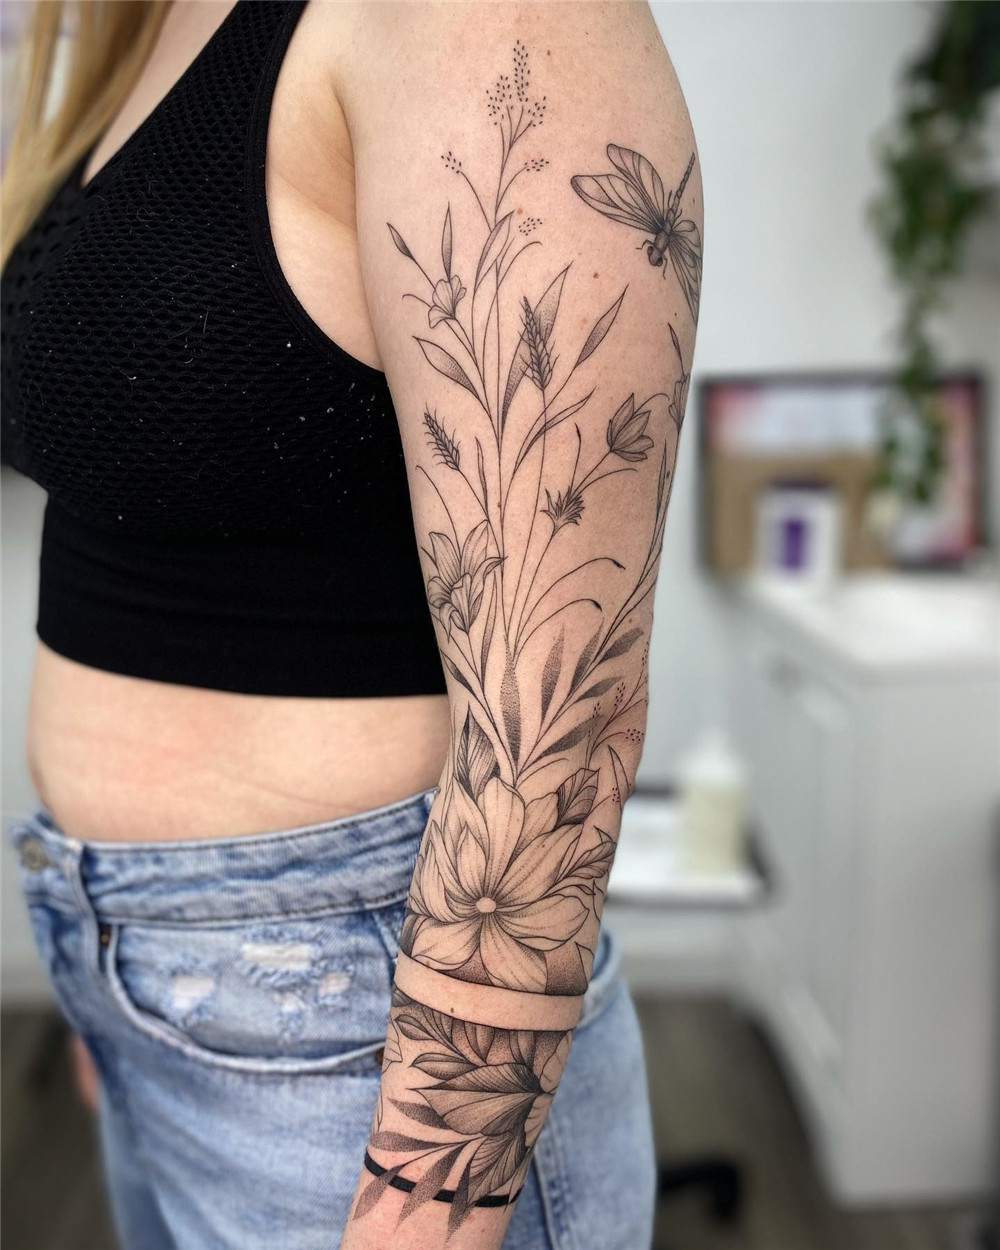 floral sleeve tattoo design for women; sleeve tattoo, tattoos for women, sleeve tattoo design, floral sleeve tattoo, #sleevetattoo #tattoosforwomen, #floralsleevetattoo